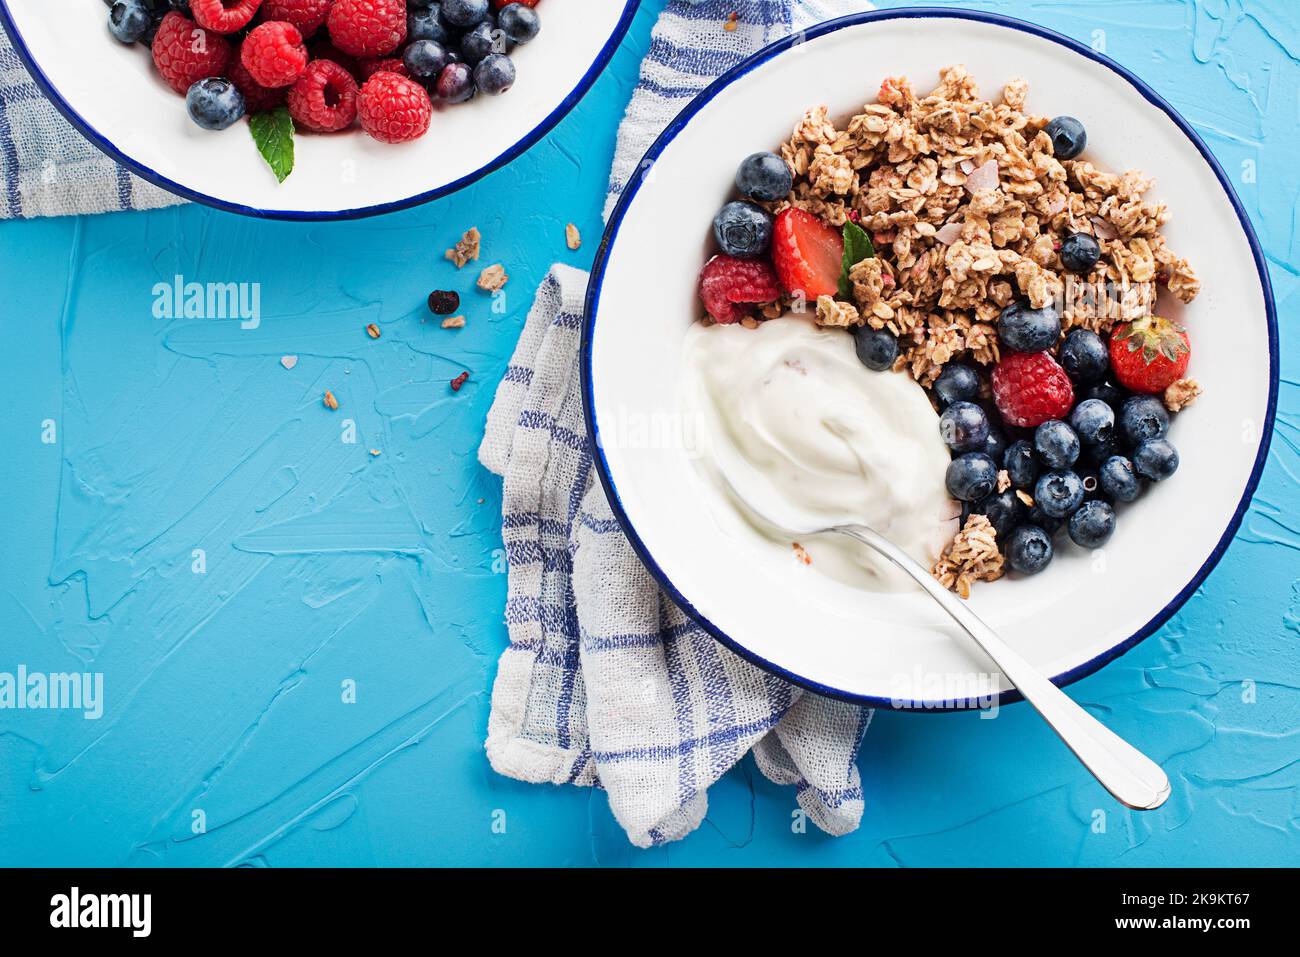 A plate of dry granola served with fresh berry fruit and yogurt. Oatmeal plate. Healthy food, diet. Top view. Stock Photo